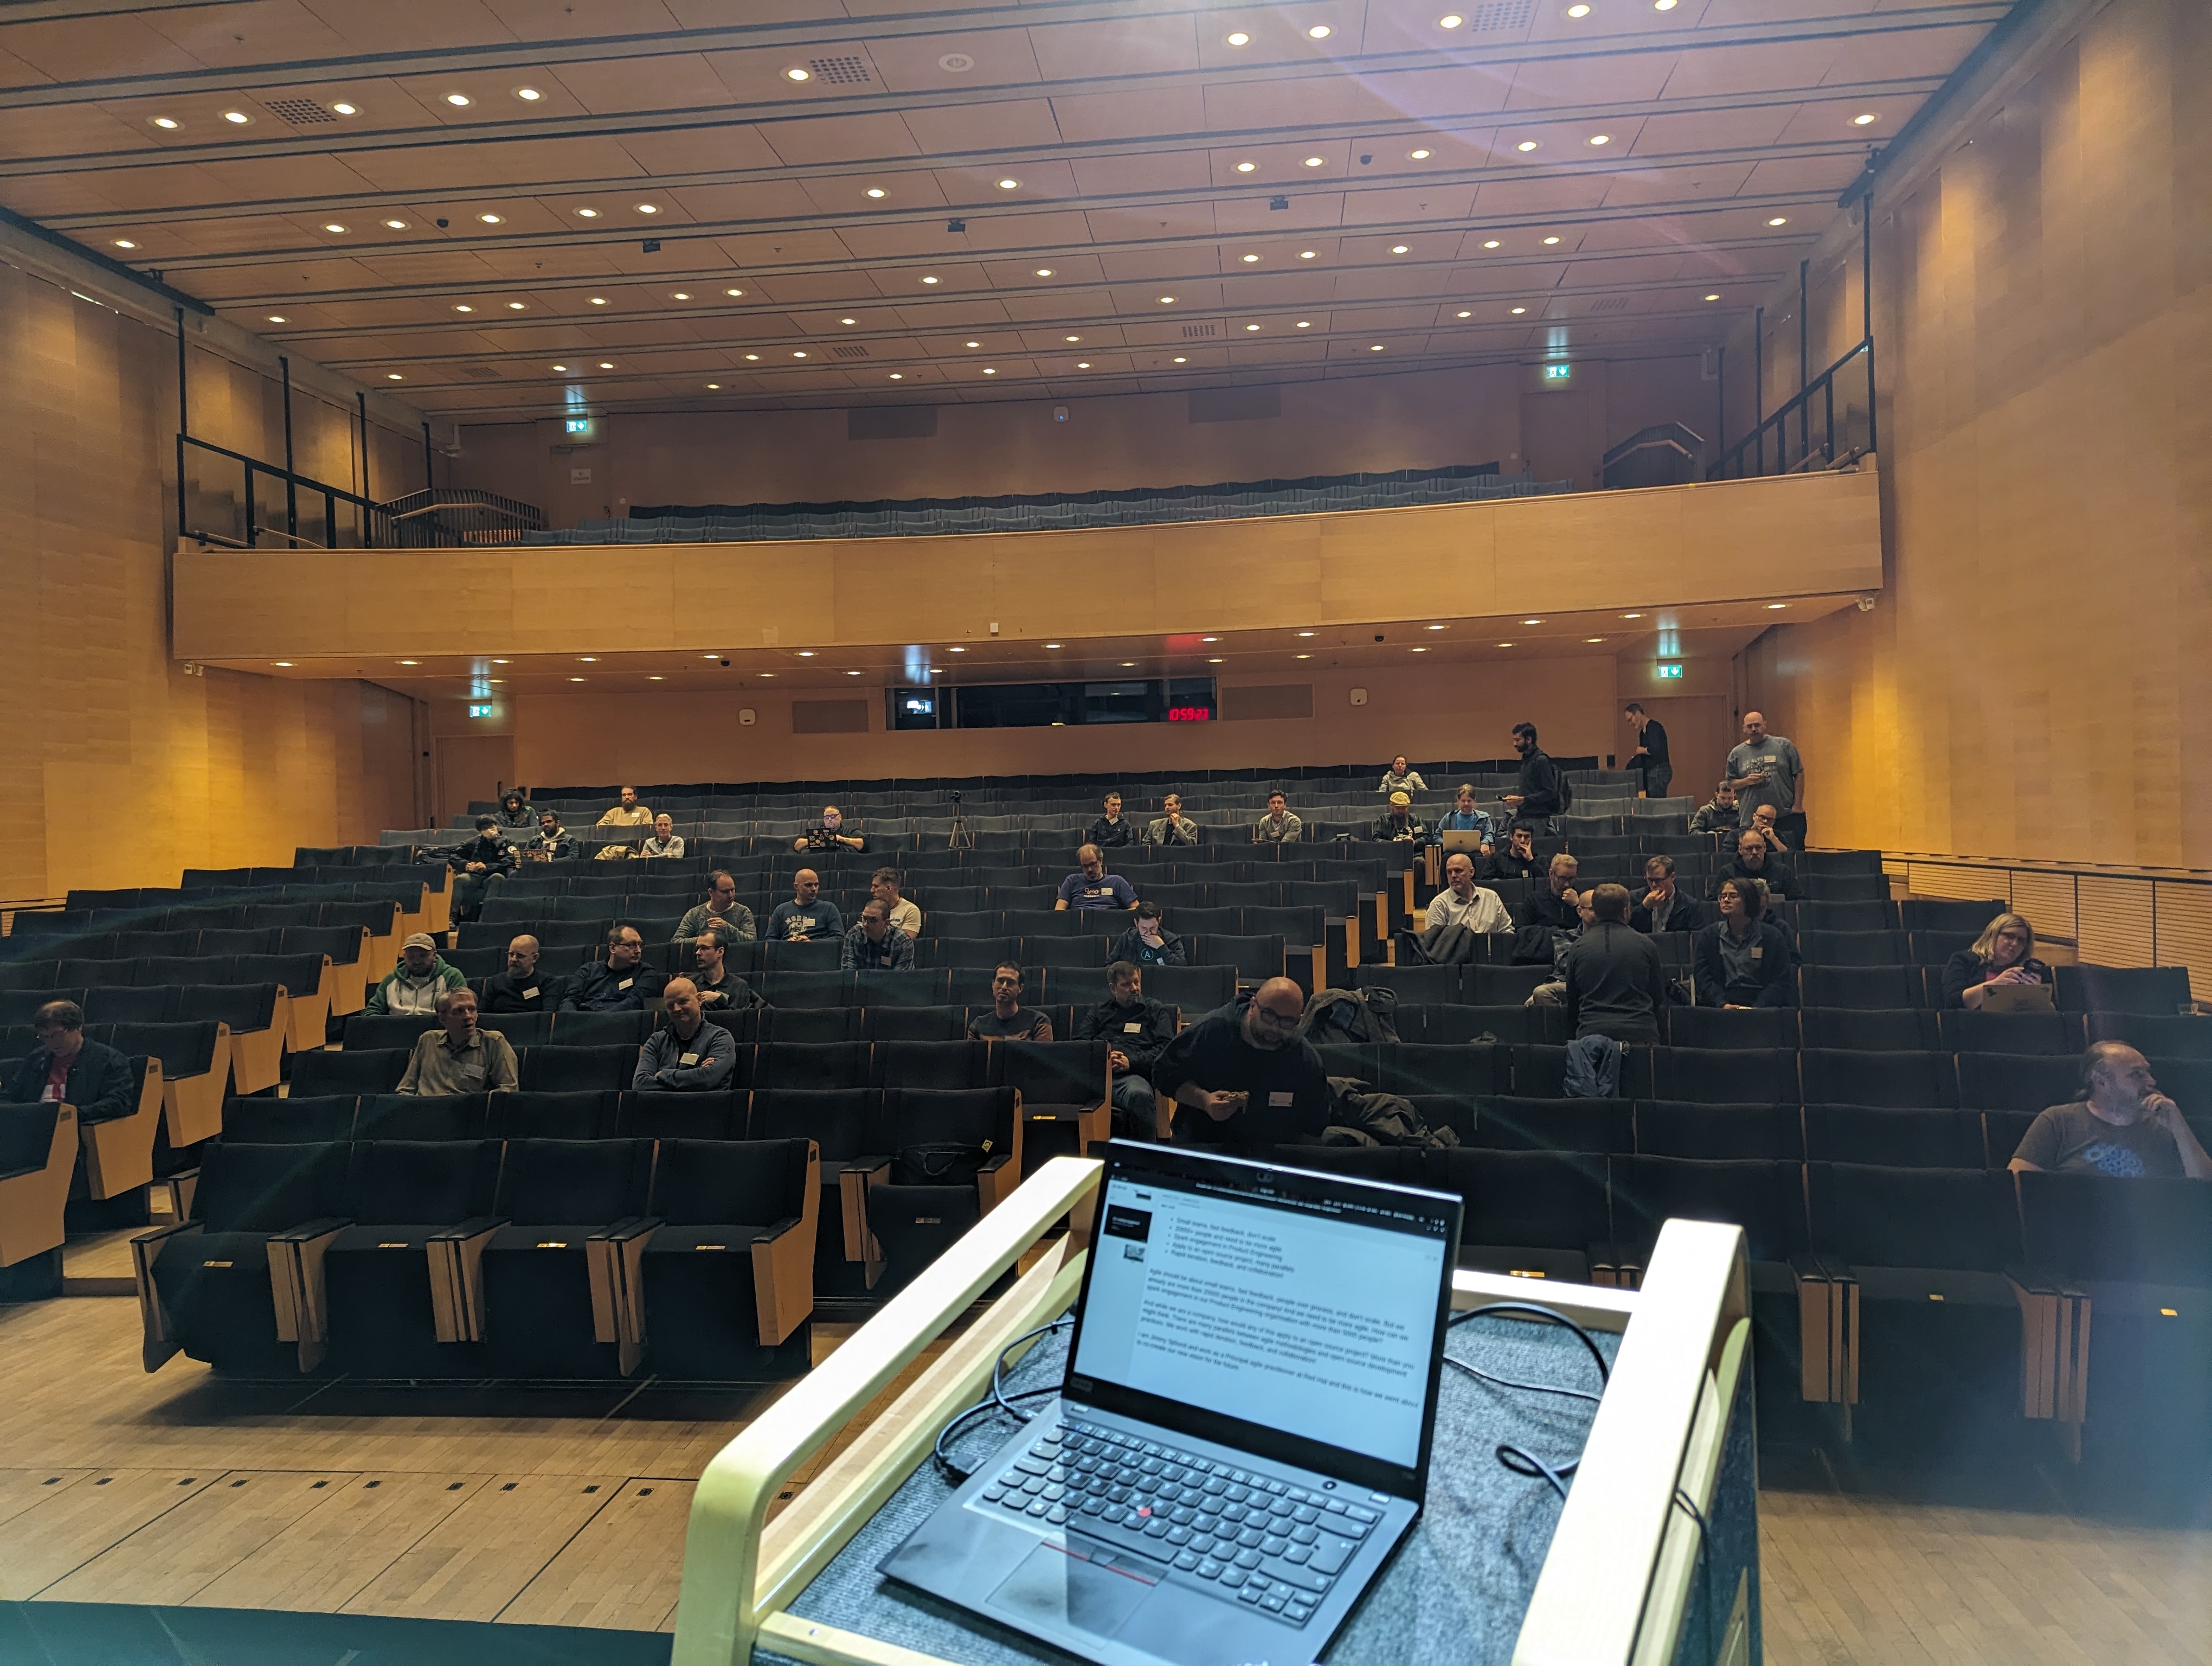 The view from the speaker podium as the room started to fill again after a long break.